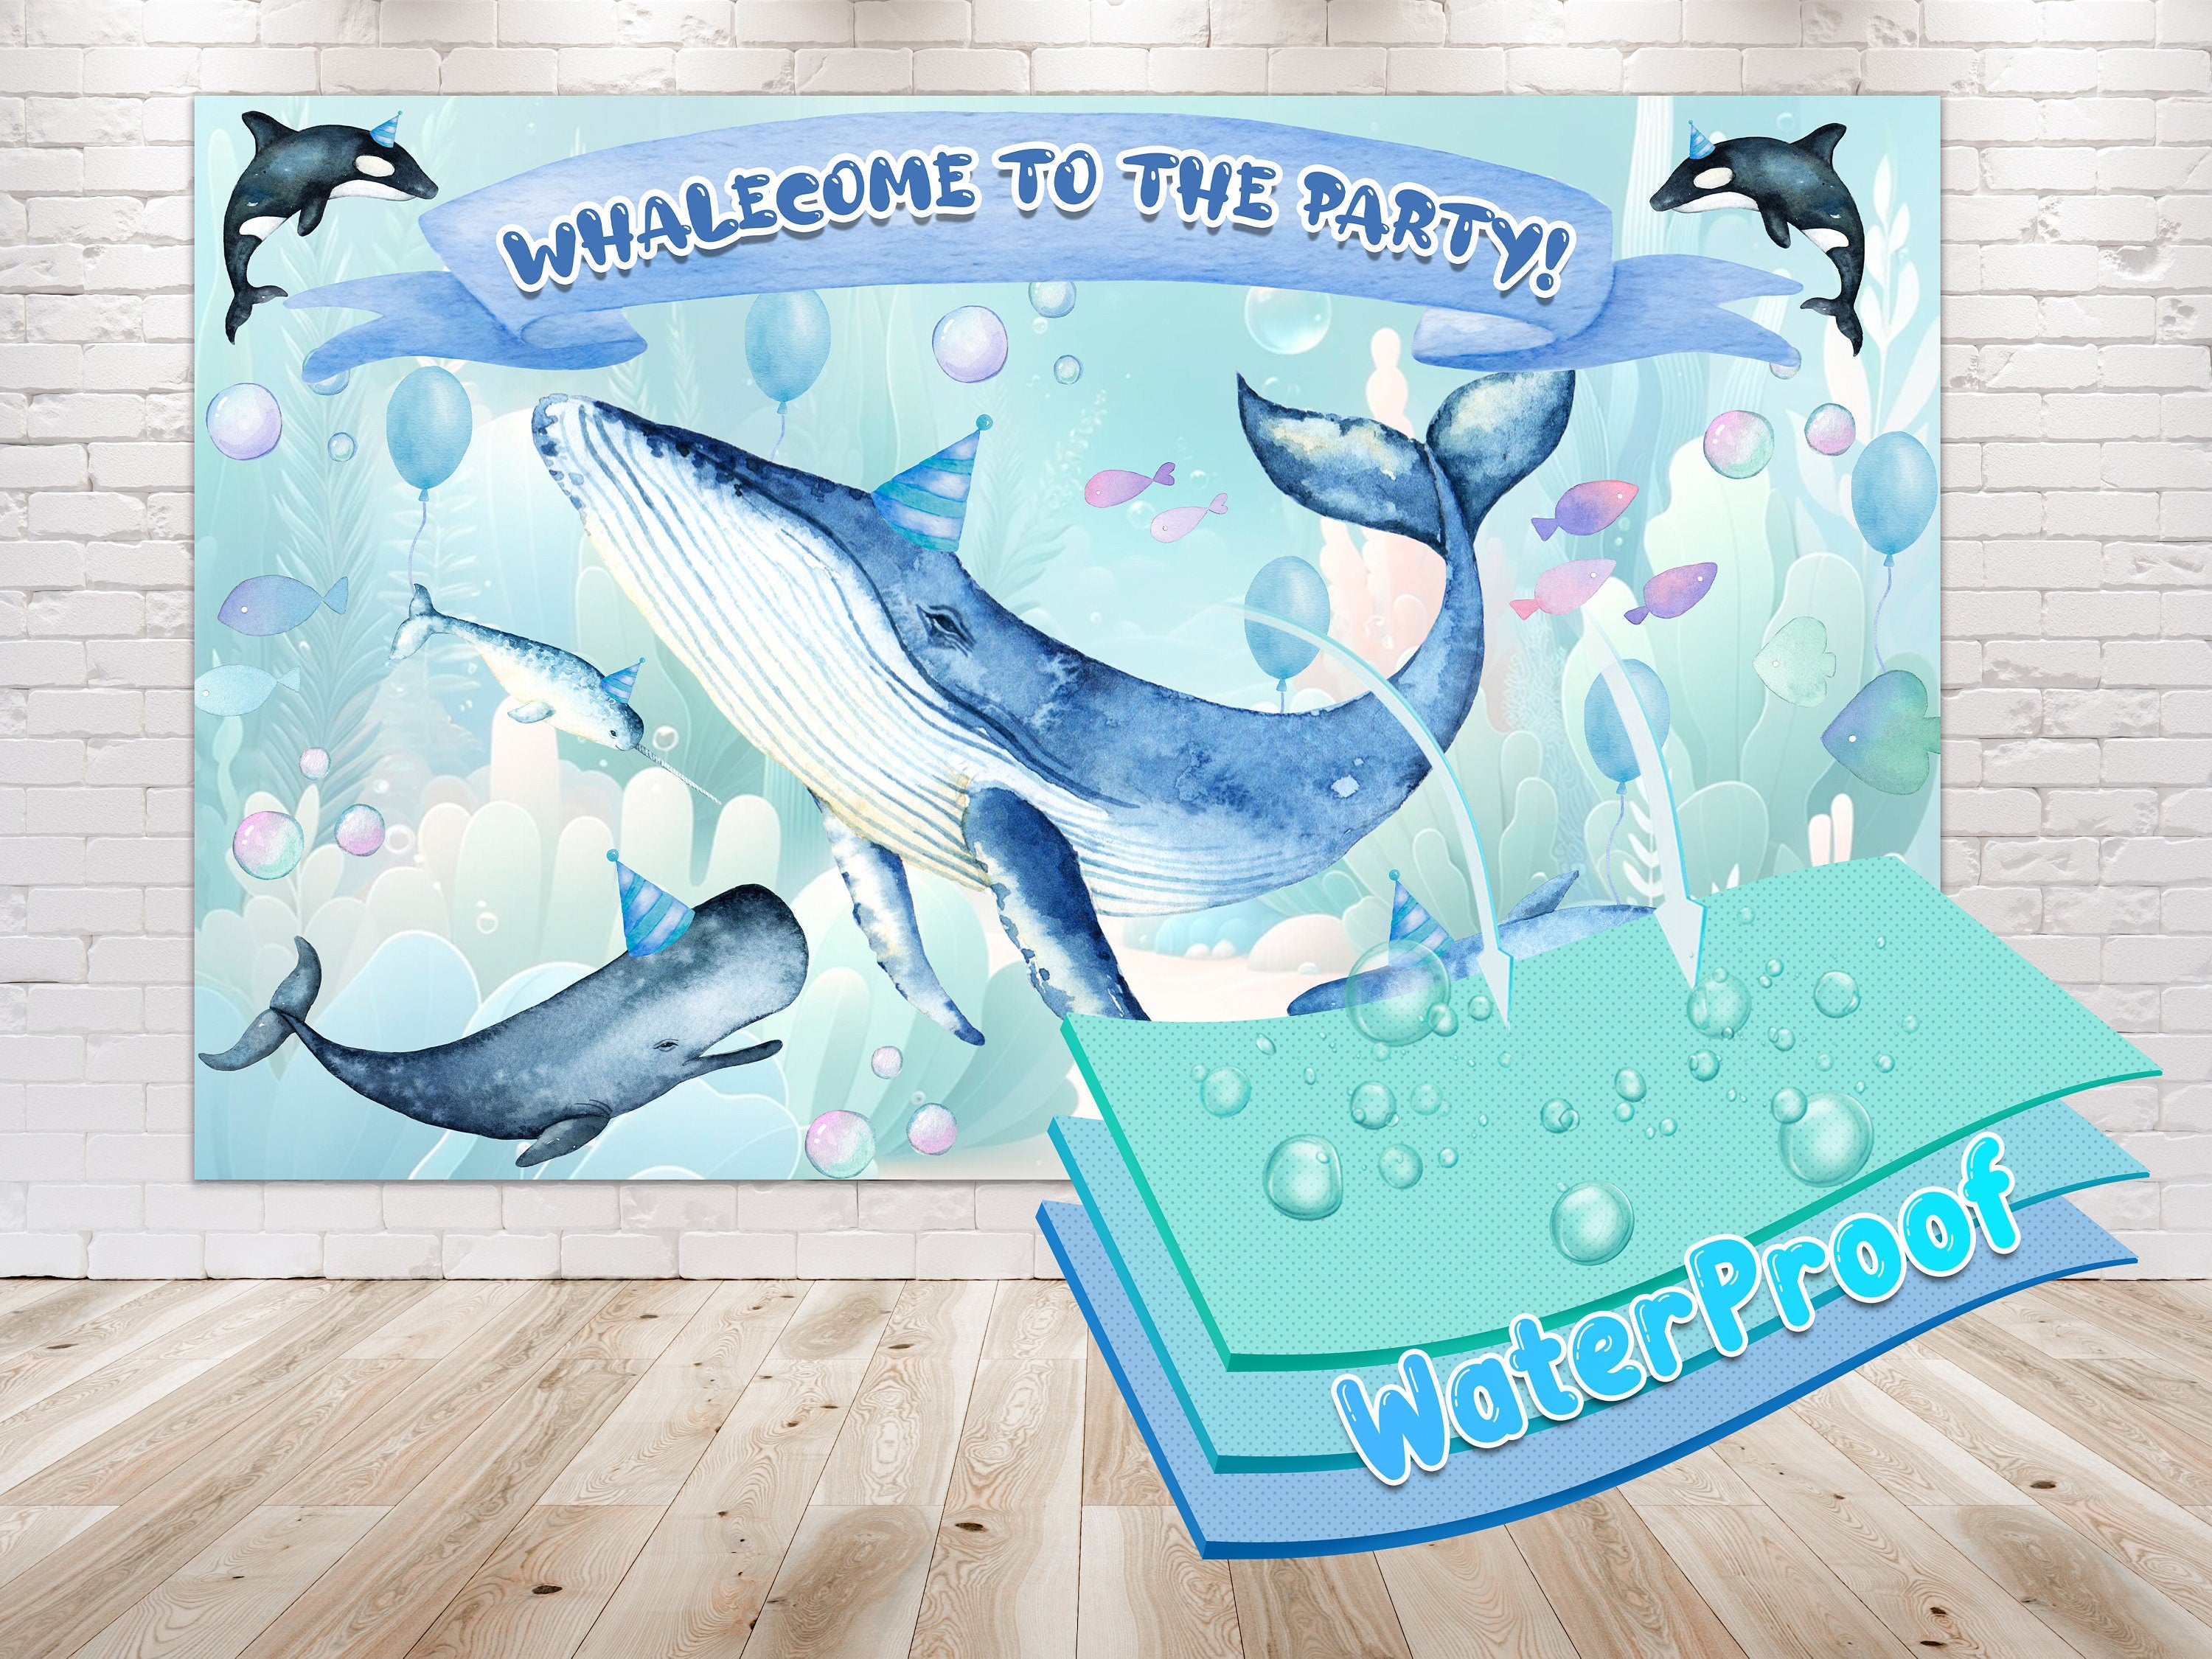 Whalecome to the Party!" Baby Shower Backdrop 5x3 FT - Ocean-Themed Celebration Decor